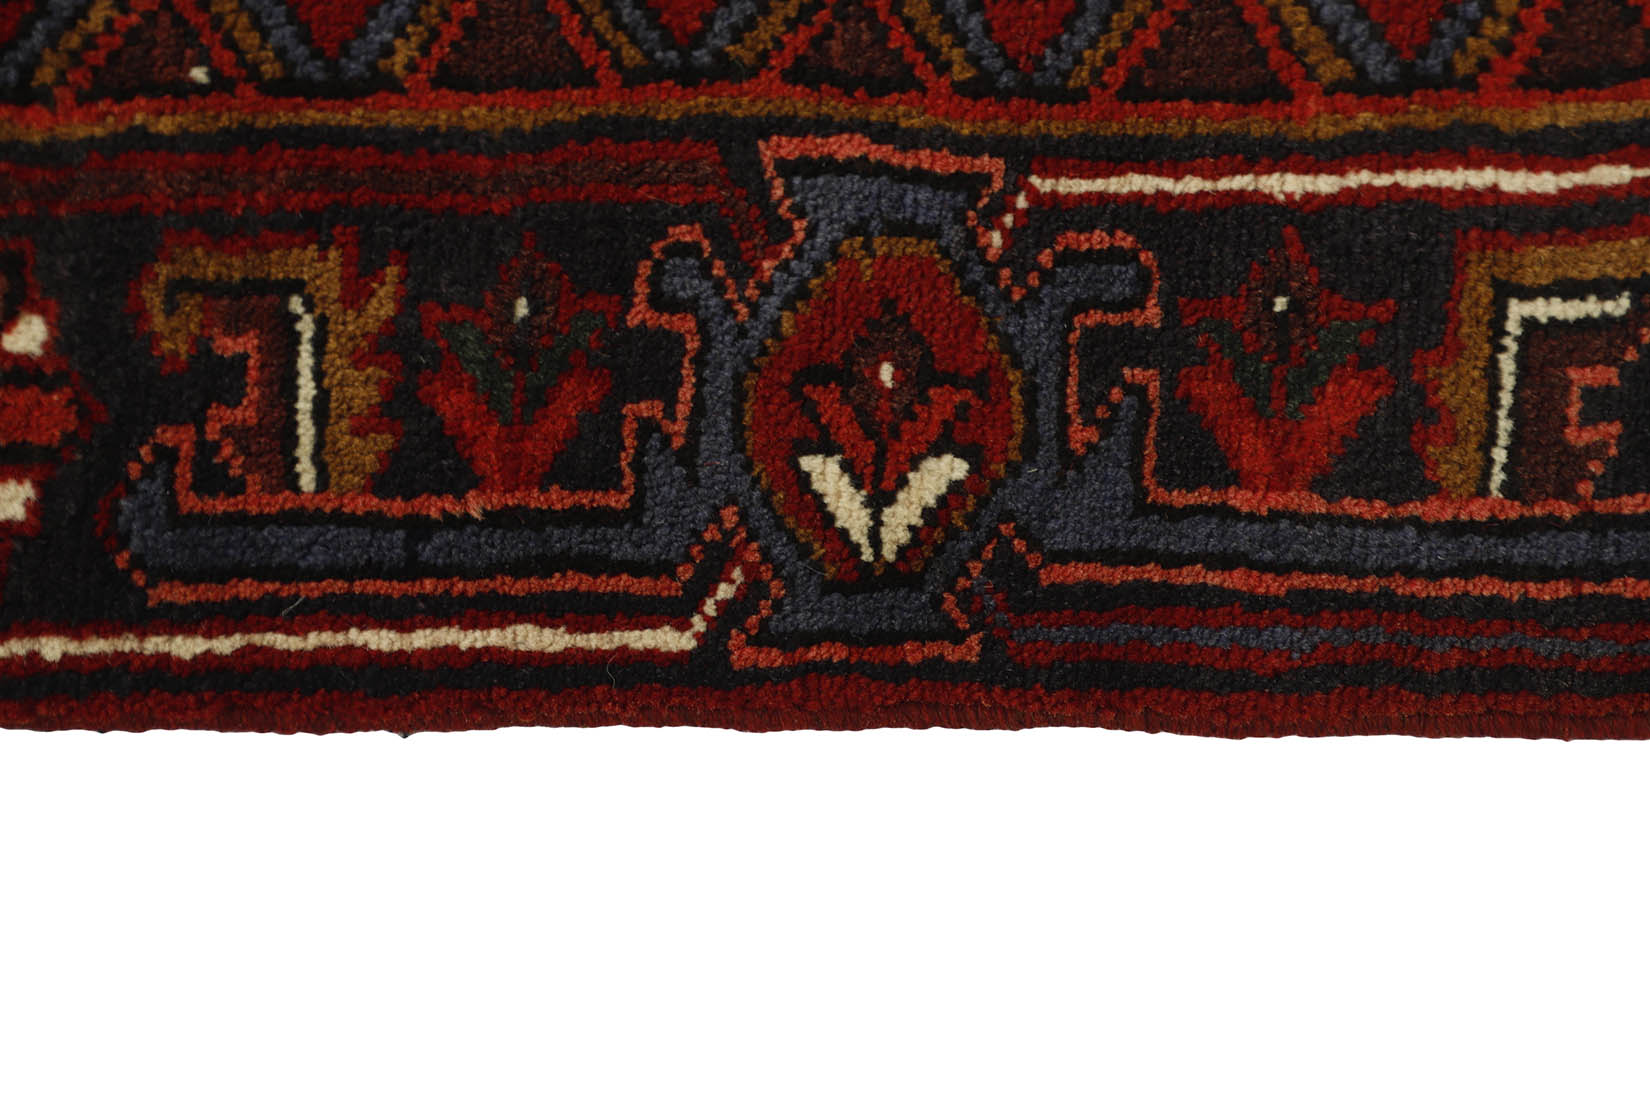 Red traditional persian rug
